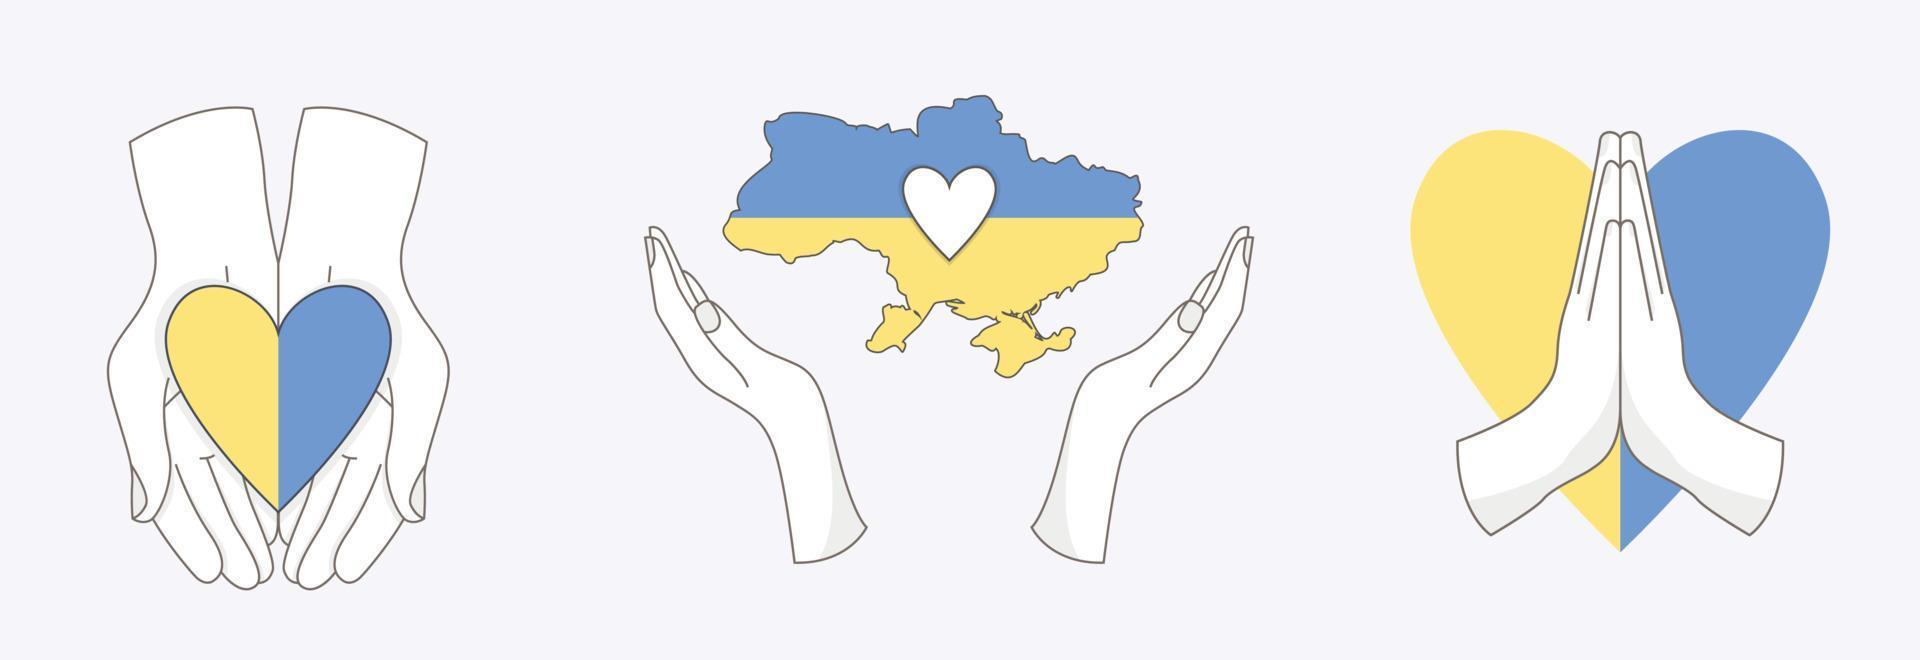 Set of Ukrainian elements with different hands. Heart flag and map of Ukraine. Save Ukraine Concept. Vector flat icons isolated on white background